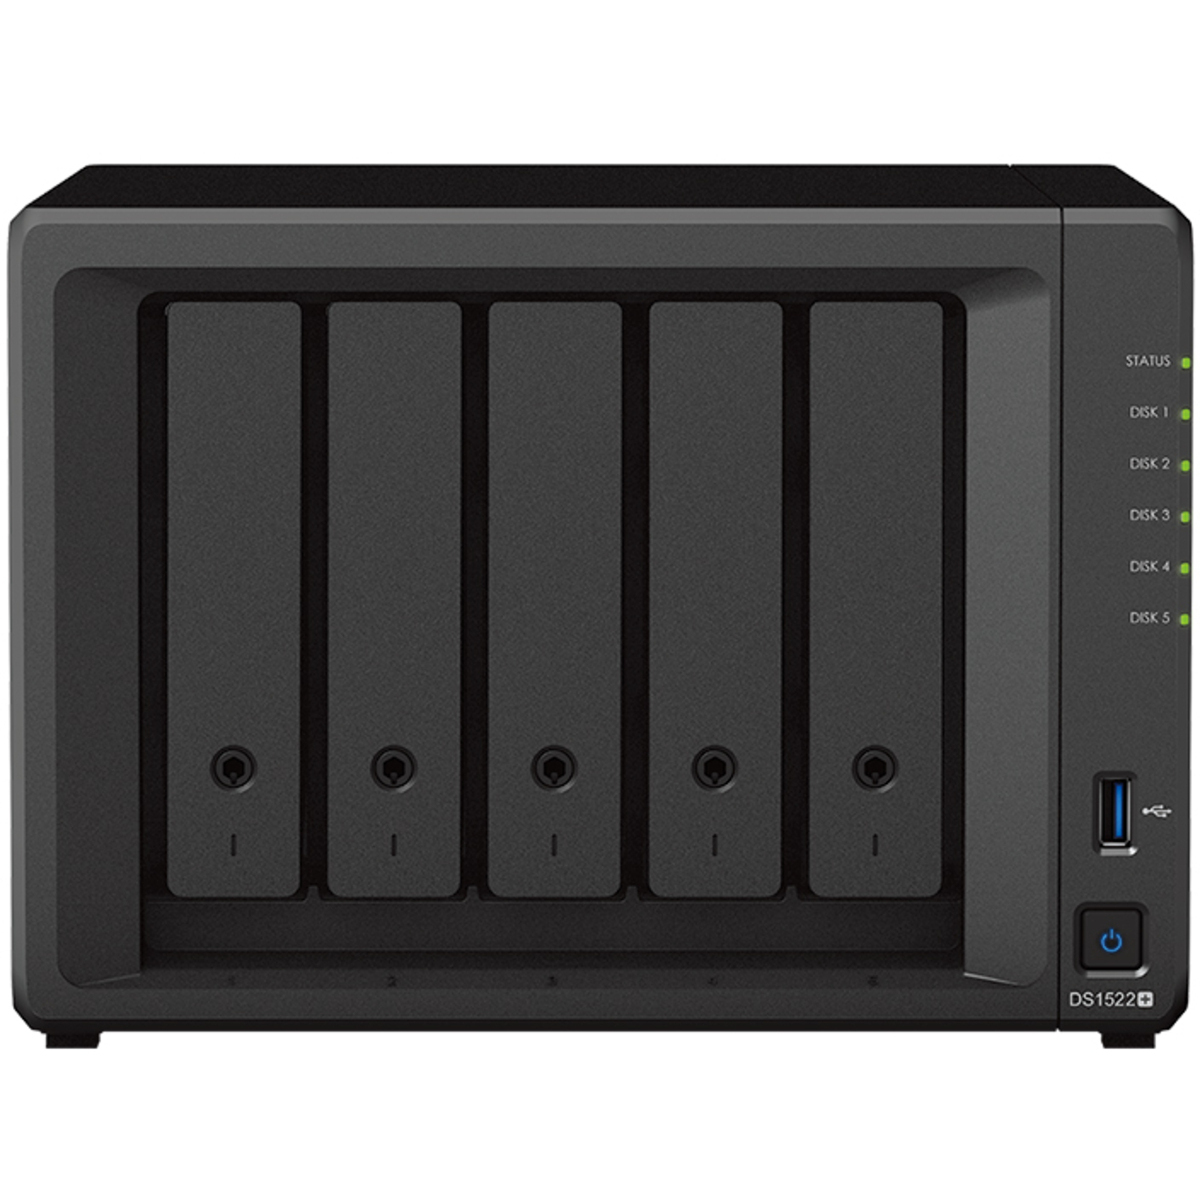 Synology DiskStation DS1522+ 72tb 5-Bay Desktop Multimedia / Power User / Business NAS - Network Attached Storage Device 4x18tb Seagate IronWolf Pro ST18000NT001 3.5 7200rpm SATA 6Gb/s HDD NAS Class Drives Installed - Burn-In Tested - ON SALE DiskStation DS1522+